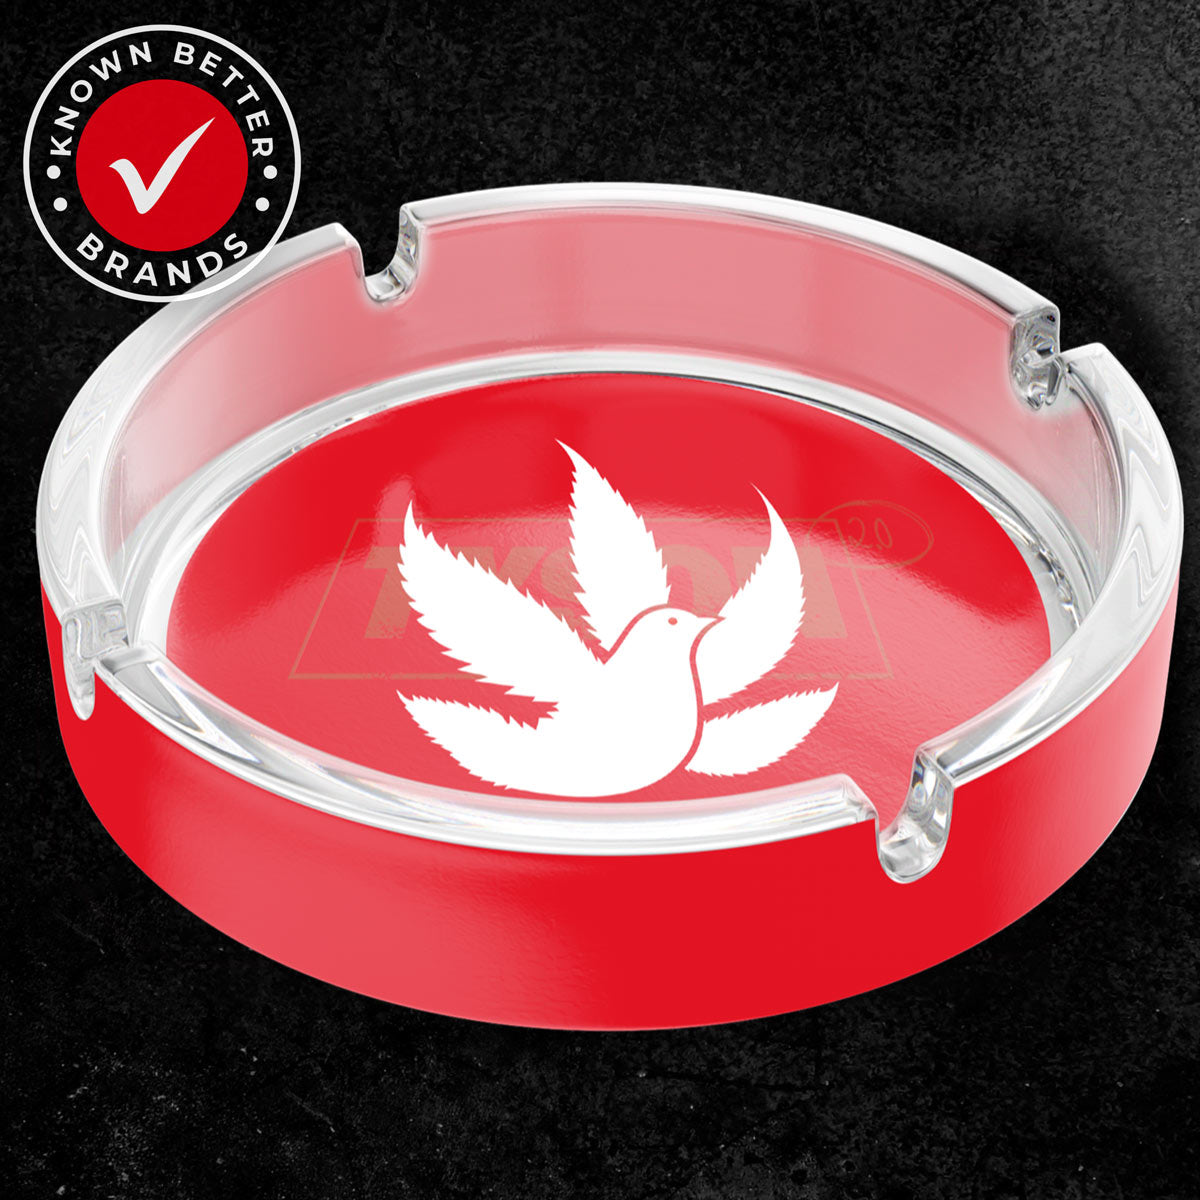 TYSON 2.0 Pigeon Ashtray in red features a dove-like bird spreading it's wings into a weed leaf array